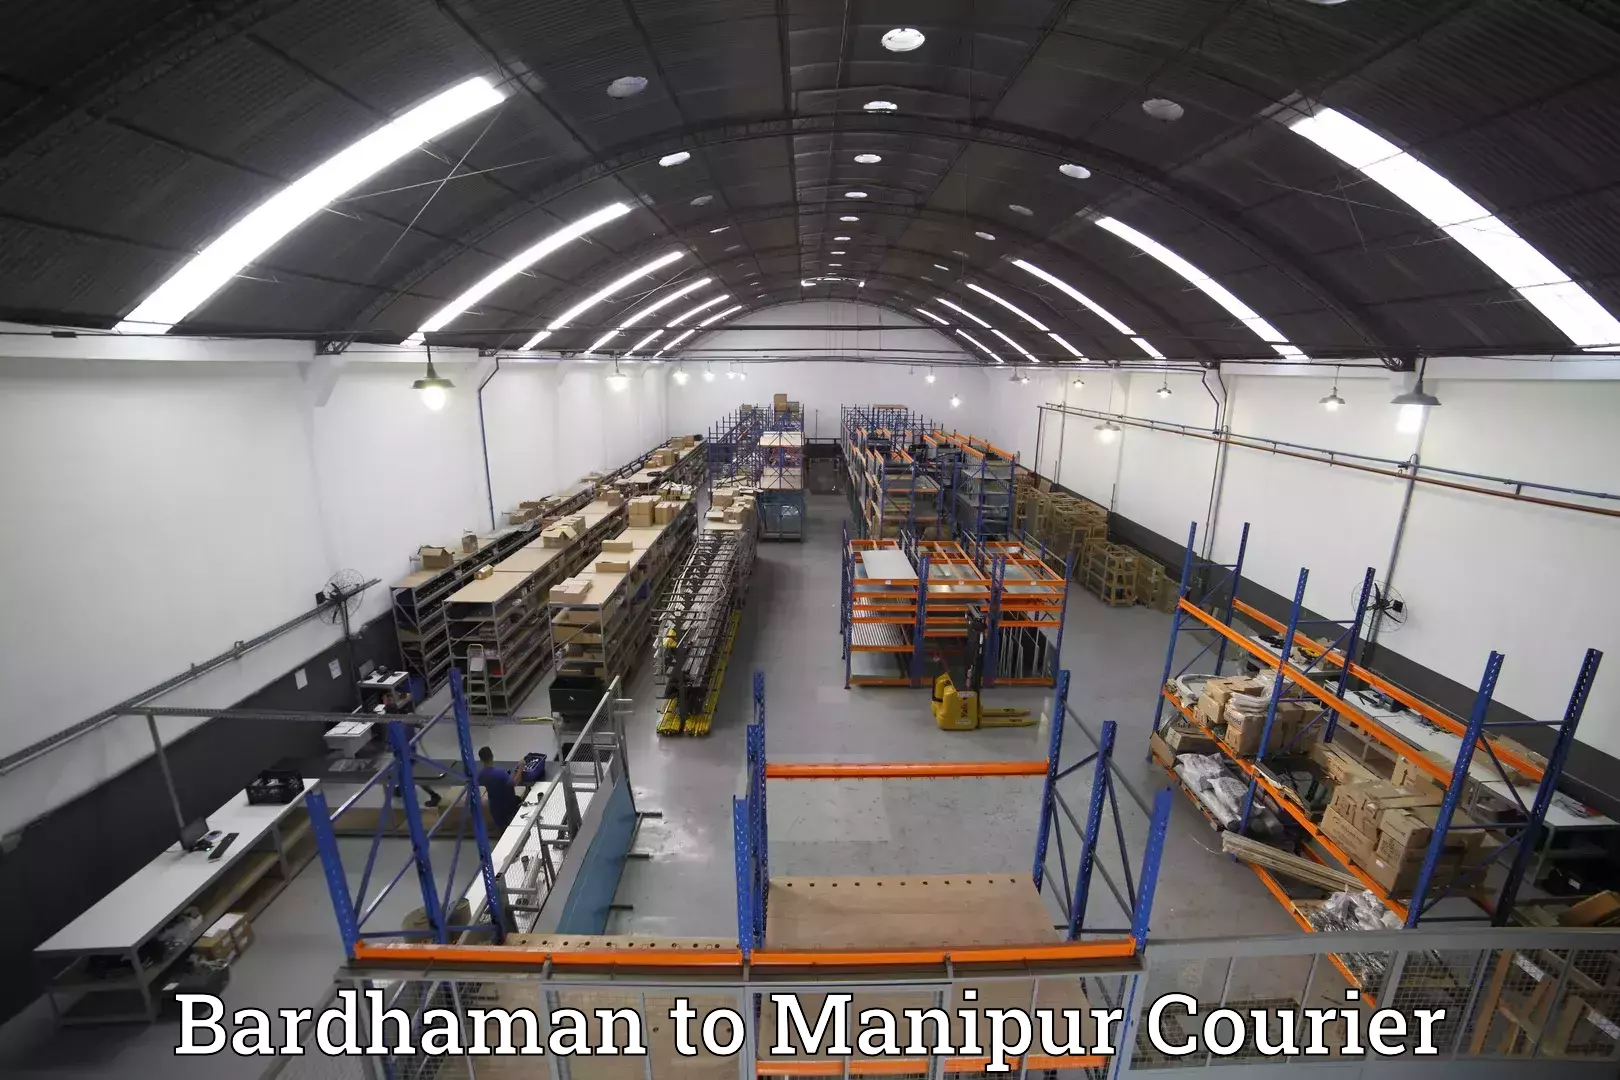 Luggage shipment specialists Bardhaman to Manipur